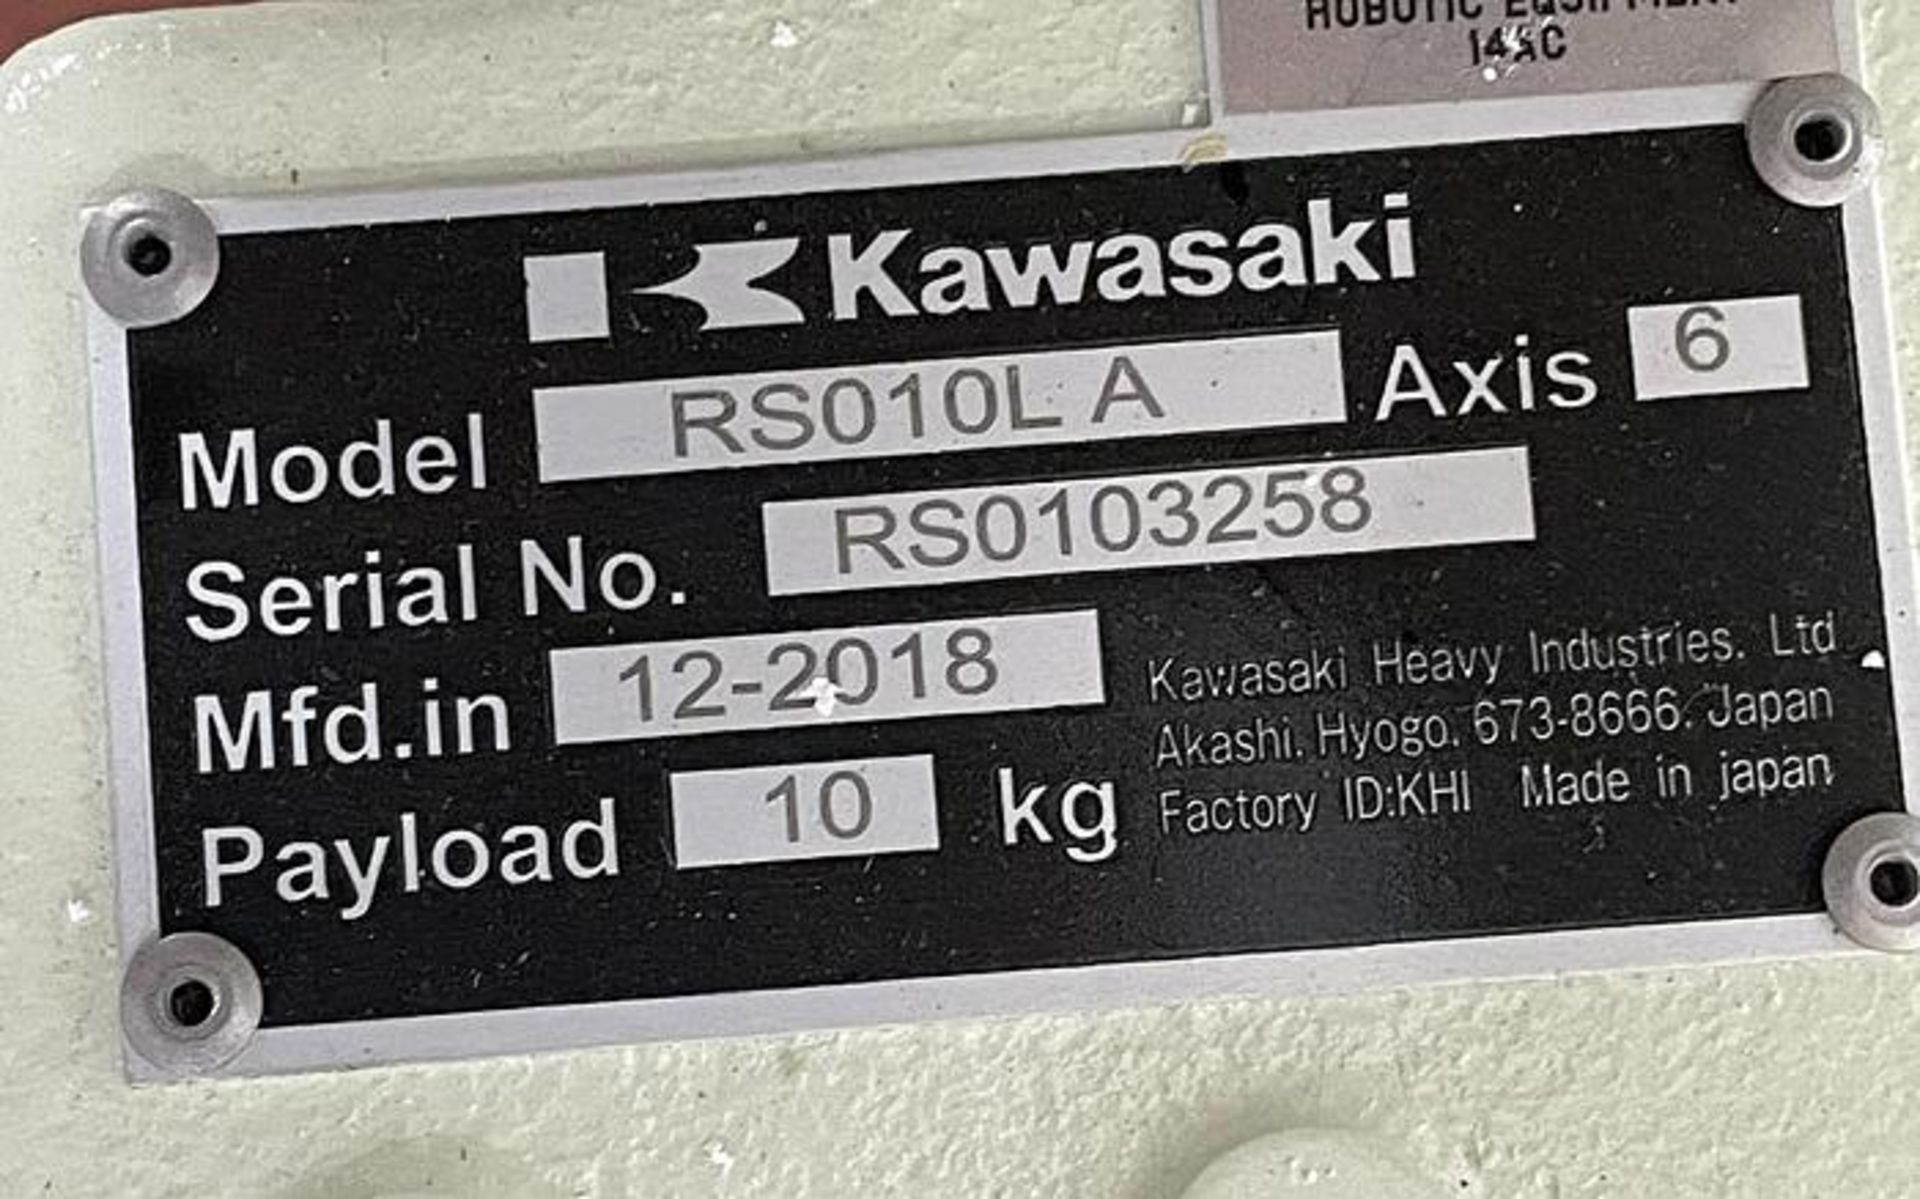 KAWASAKI ROBOT MODEL RS010L WITH E01 CONTROLLER, 10KG X 1925mm REACH, CABLES, TEACH & RISER (NEW) - Image 3 of 5